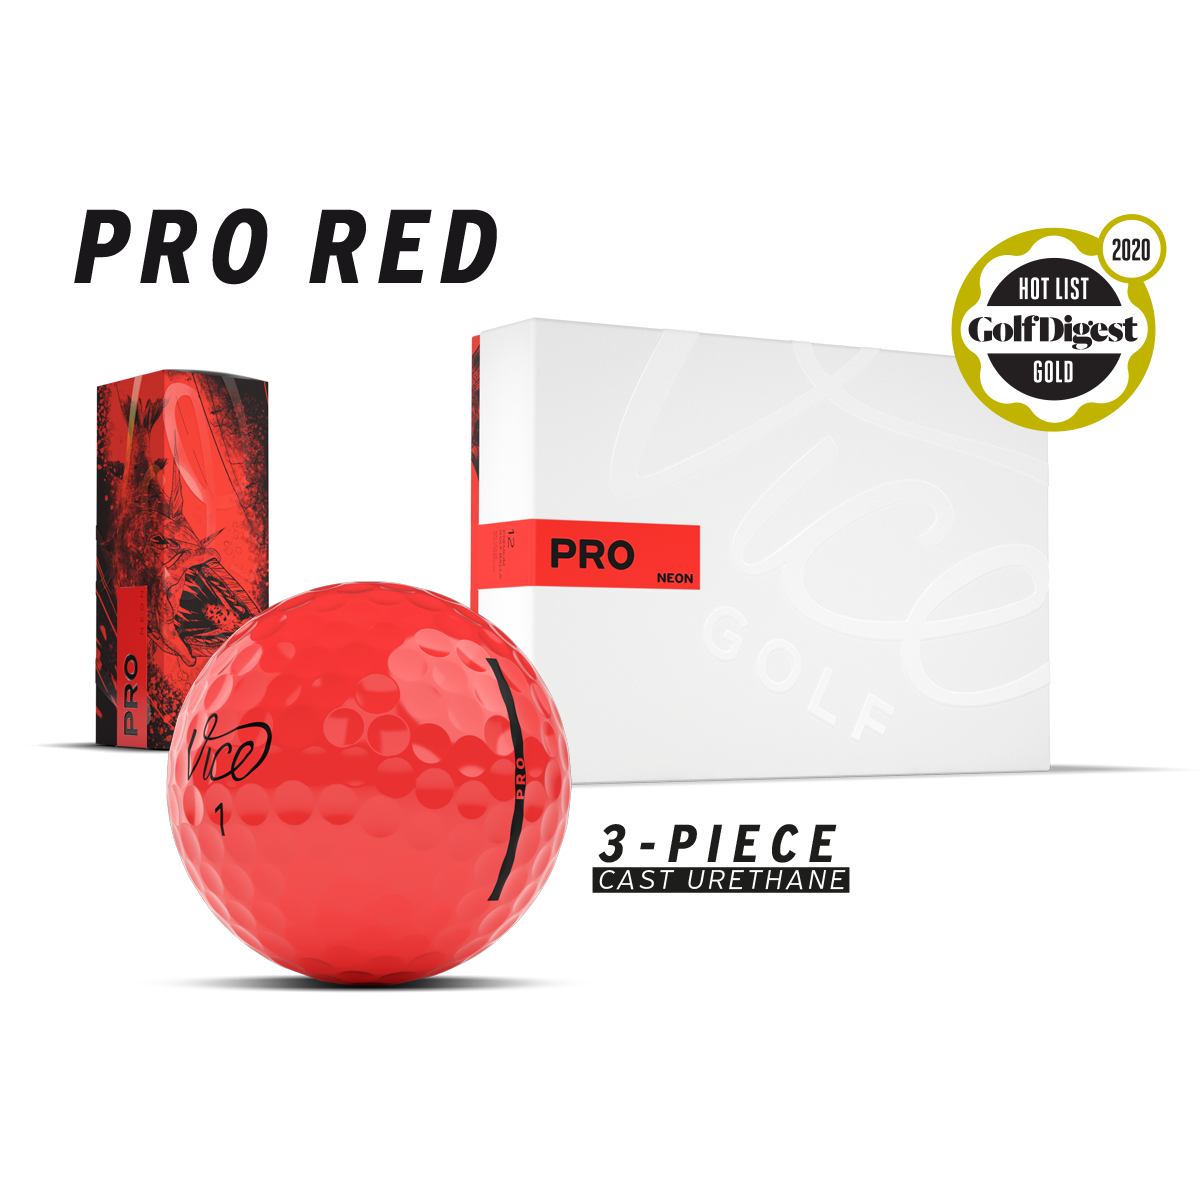 Pro Red package